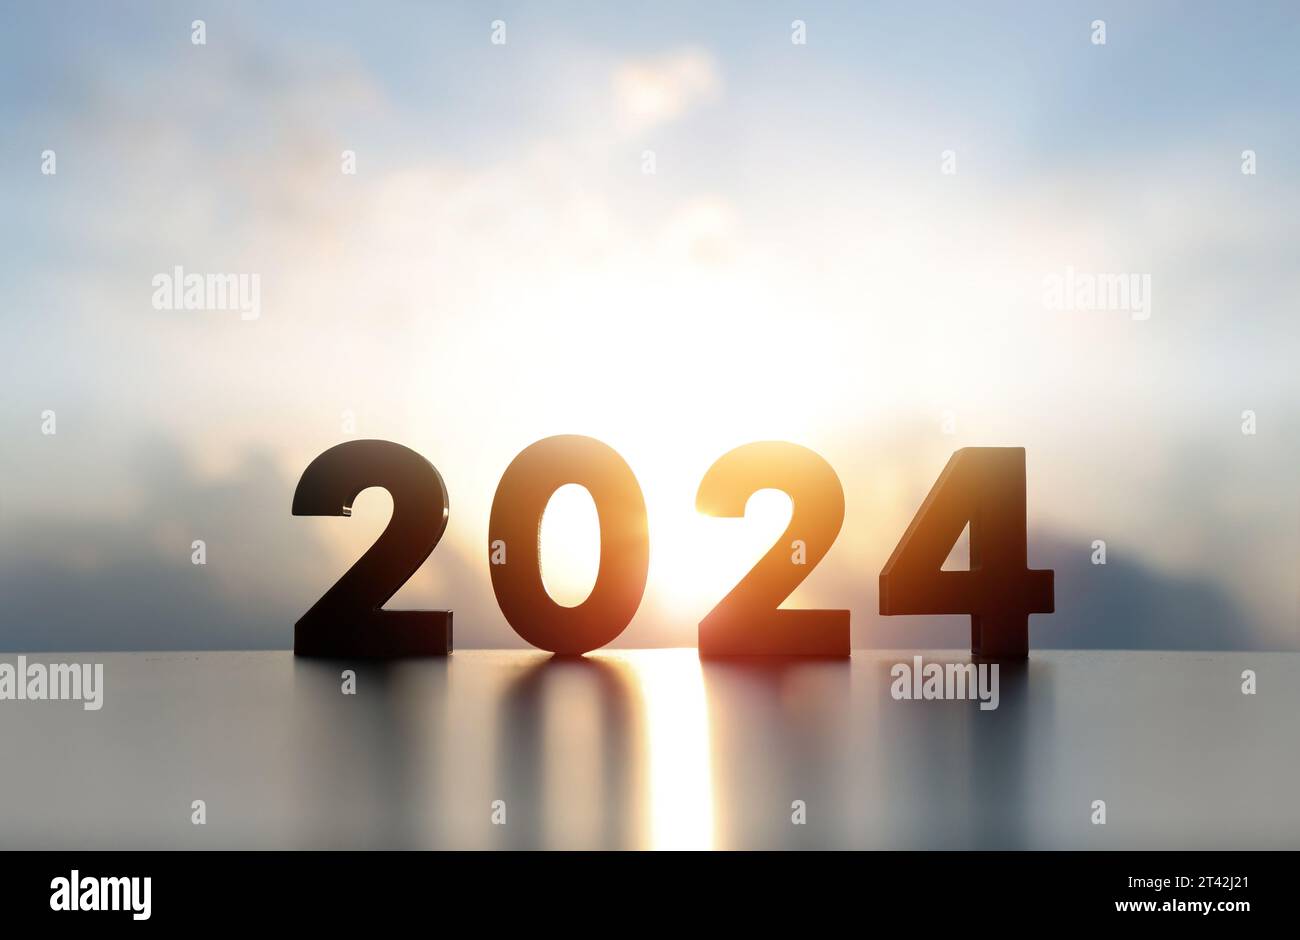 New Year's sunrise and bright sun, a brilliant light sunrise scene that promises a hopeful New Year's wish in 2024 Stock Photo